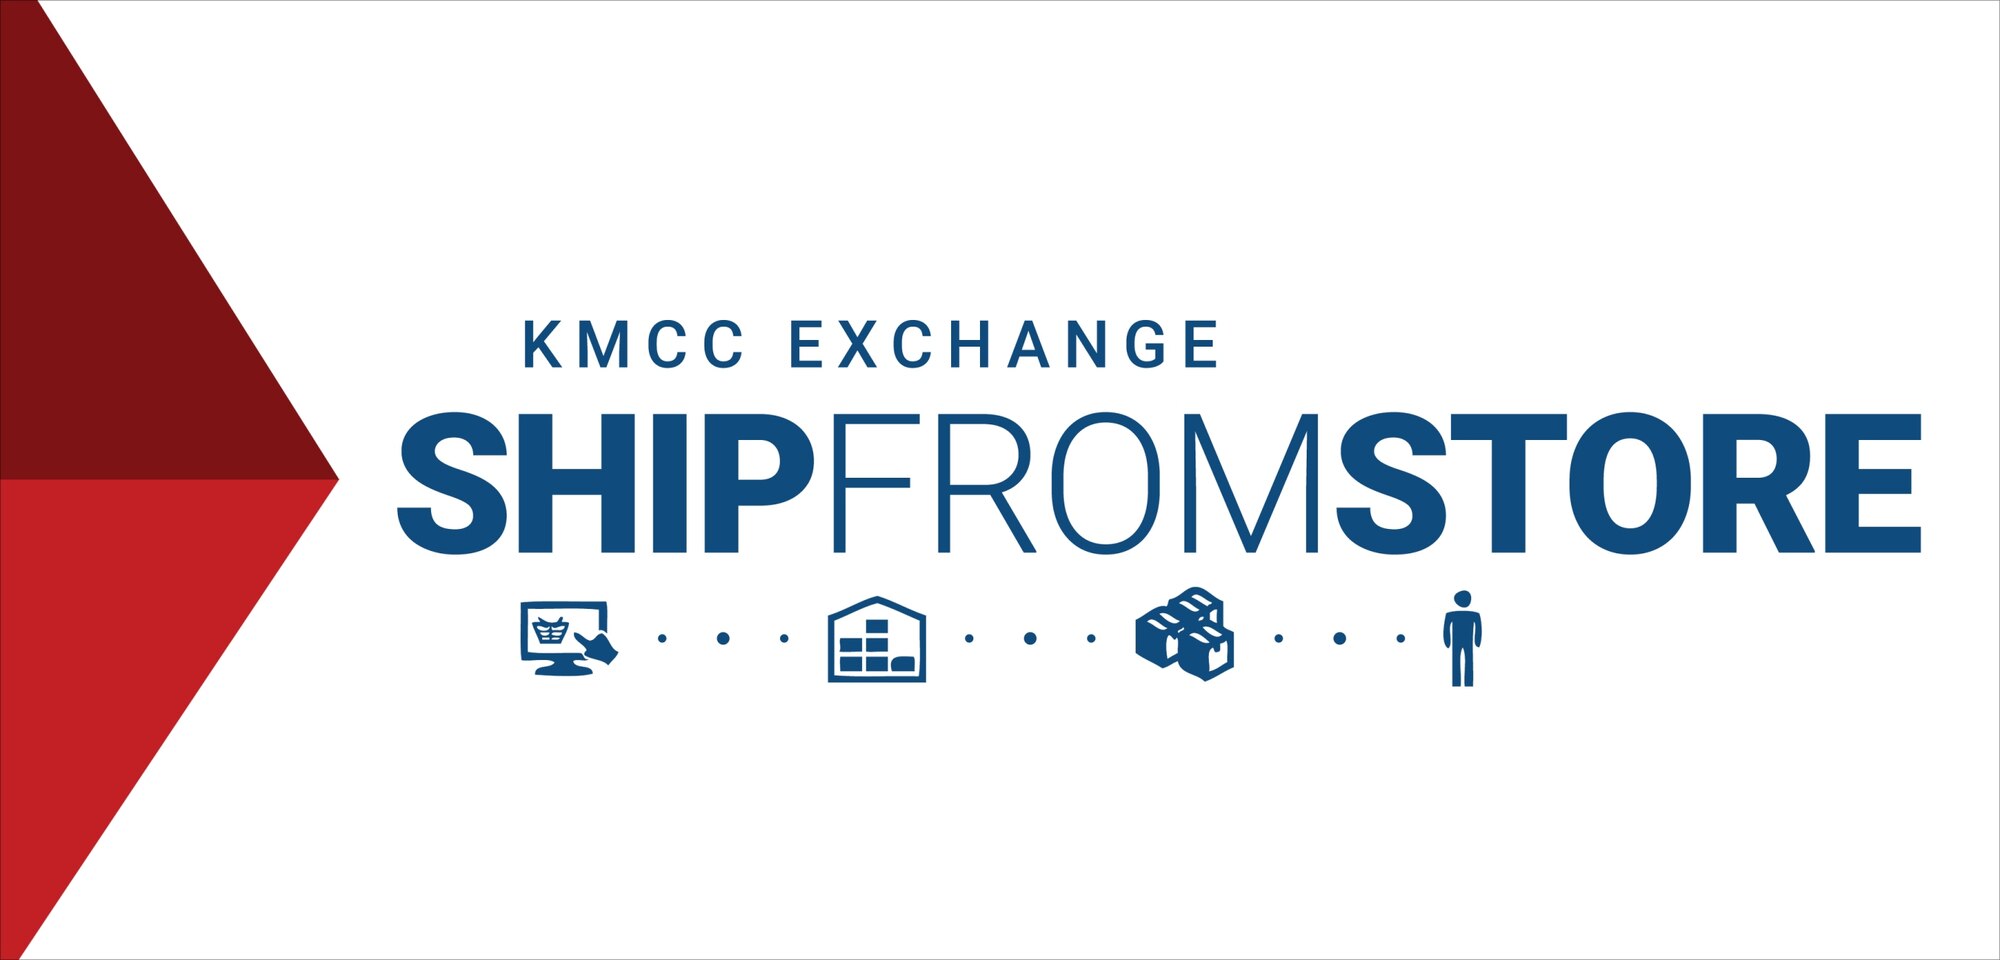 The Kaiserslautern Military Community Center’s ship-from-store program allows KMC members to have their items ordered off shopmyexchange.com shipped from the KMCC. This will significantly shorten the time it takes for customers to receive their products. (Courtesy illustration)